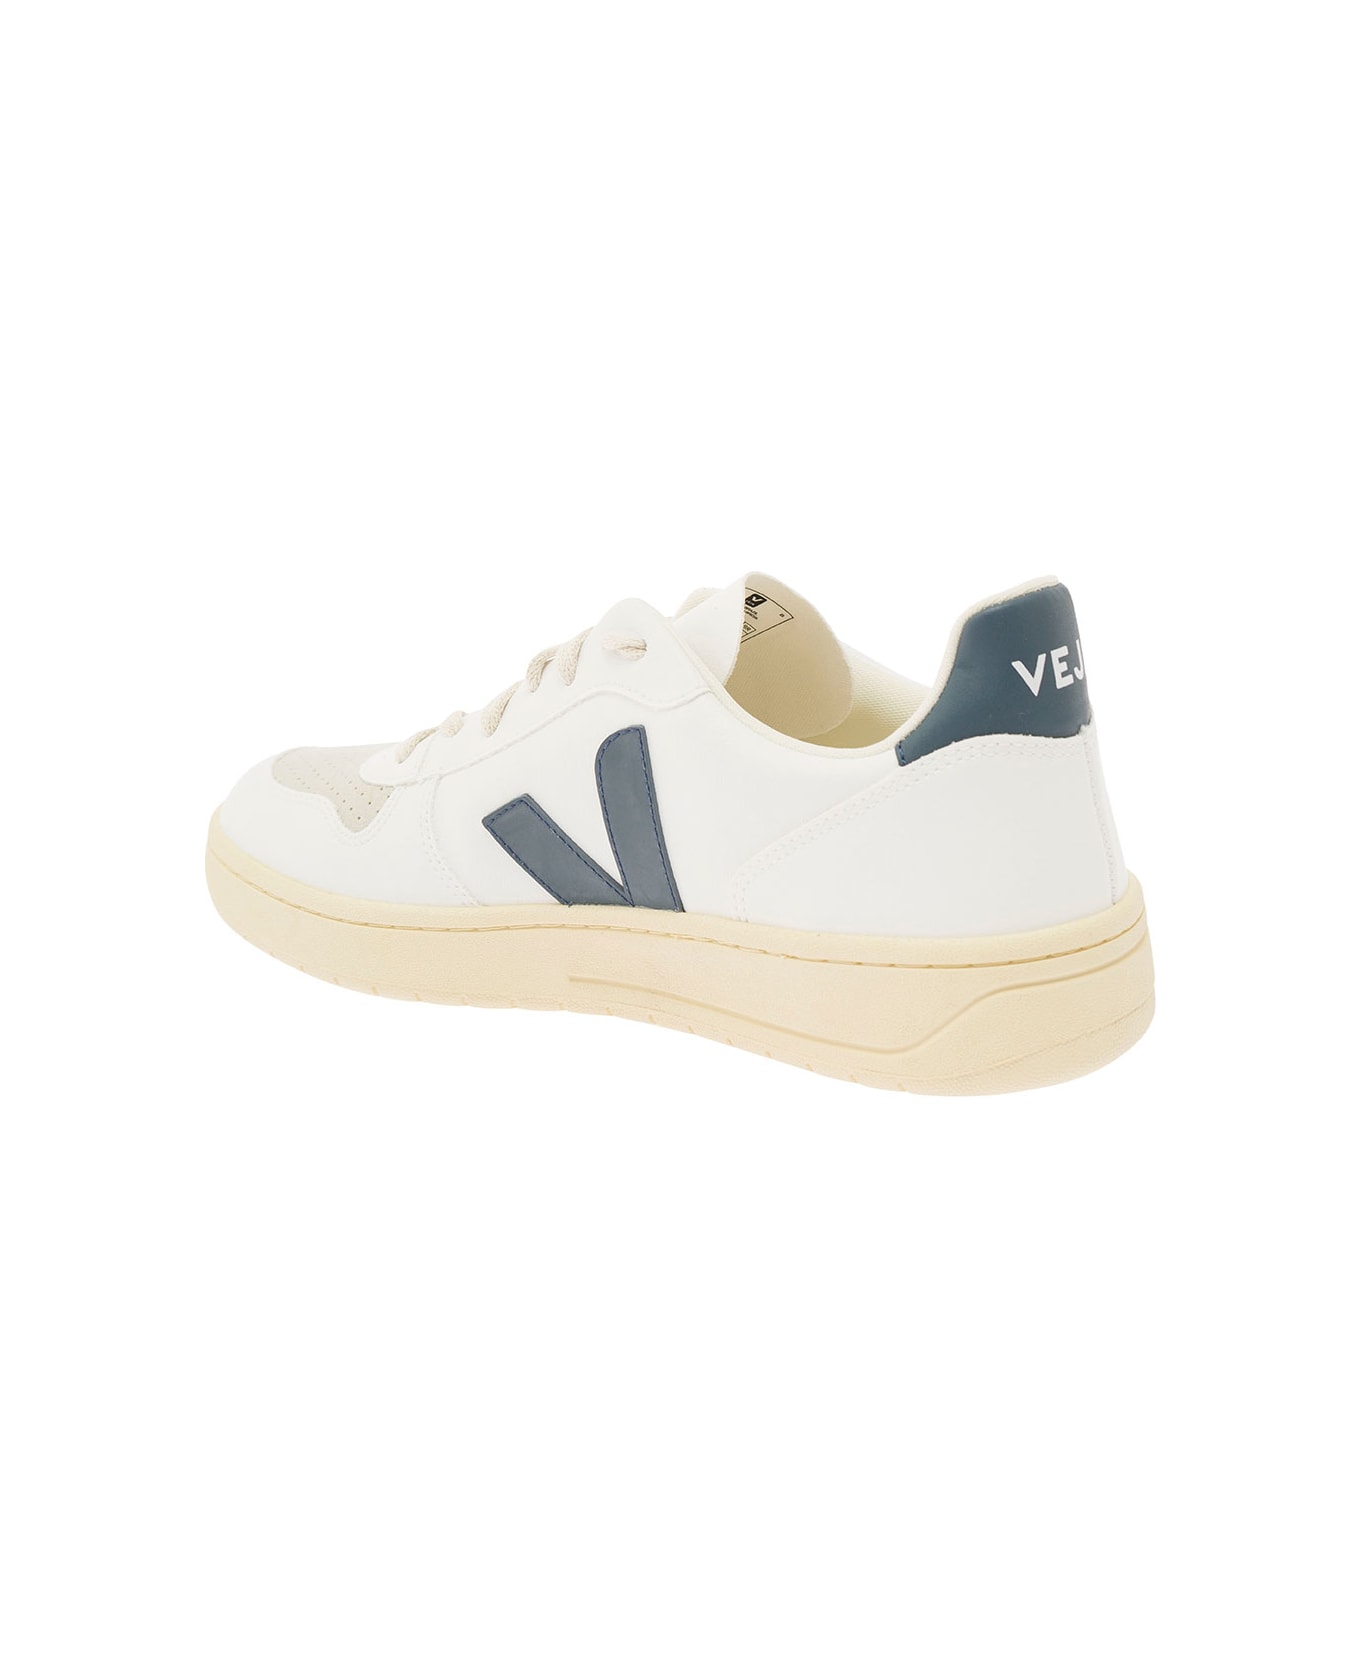 Veja White And Green Sneakers With Logo Details In Leather Man - White スニーカー